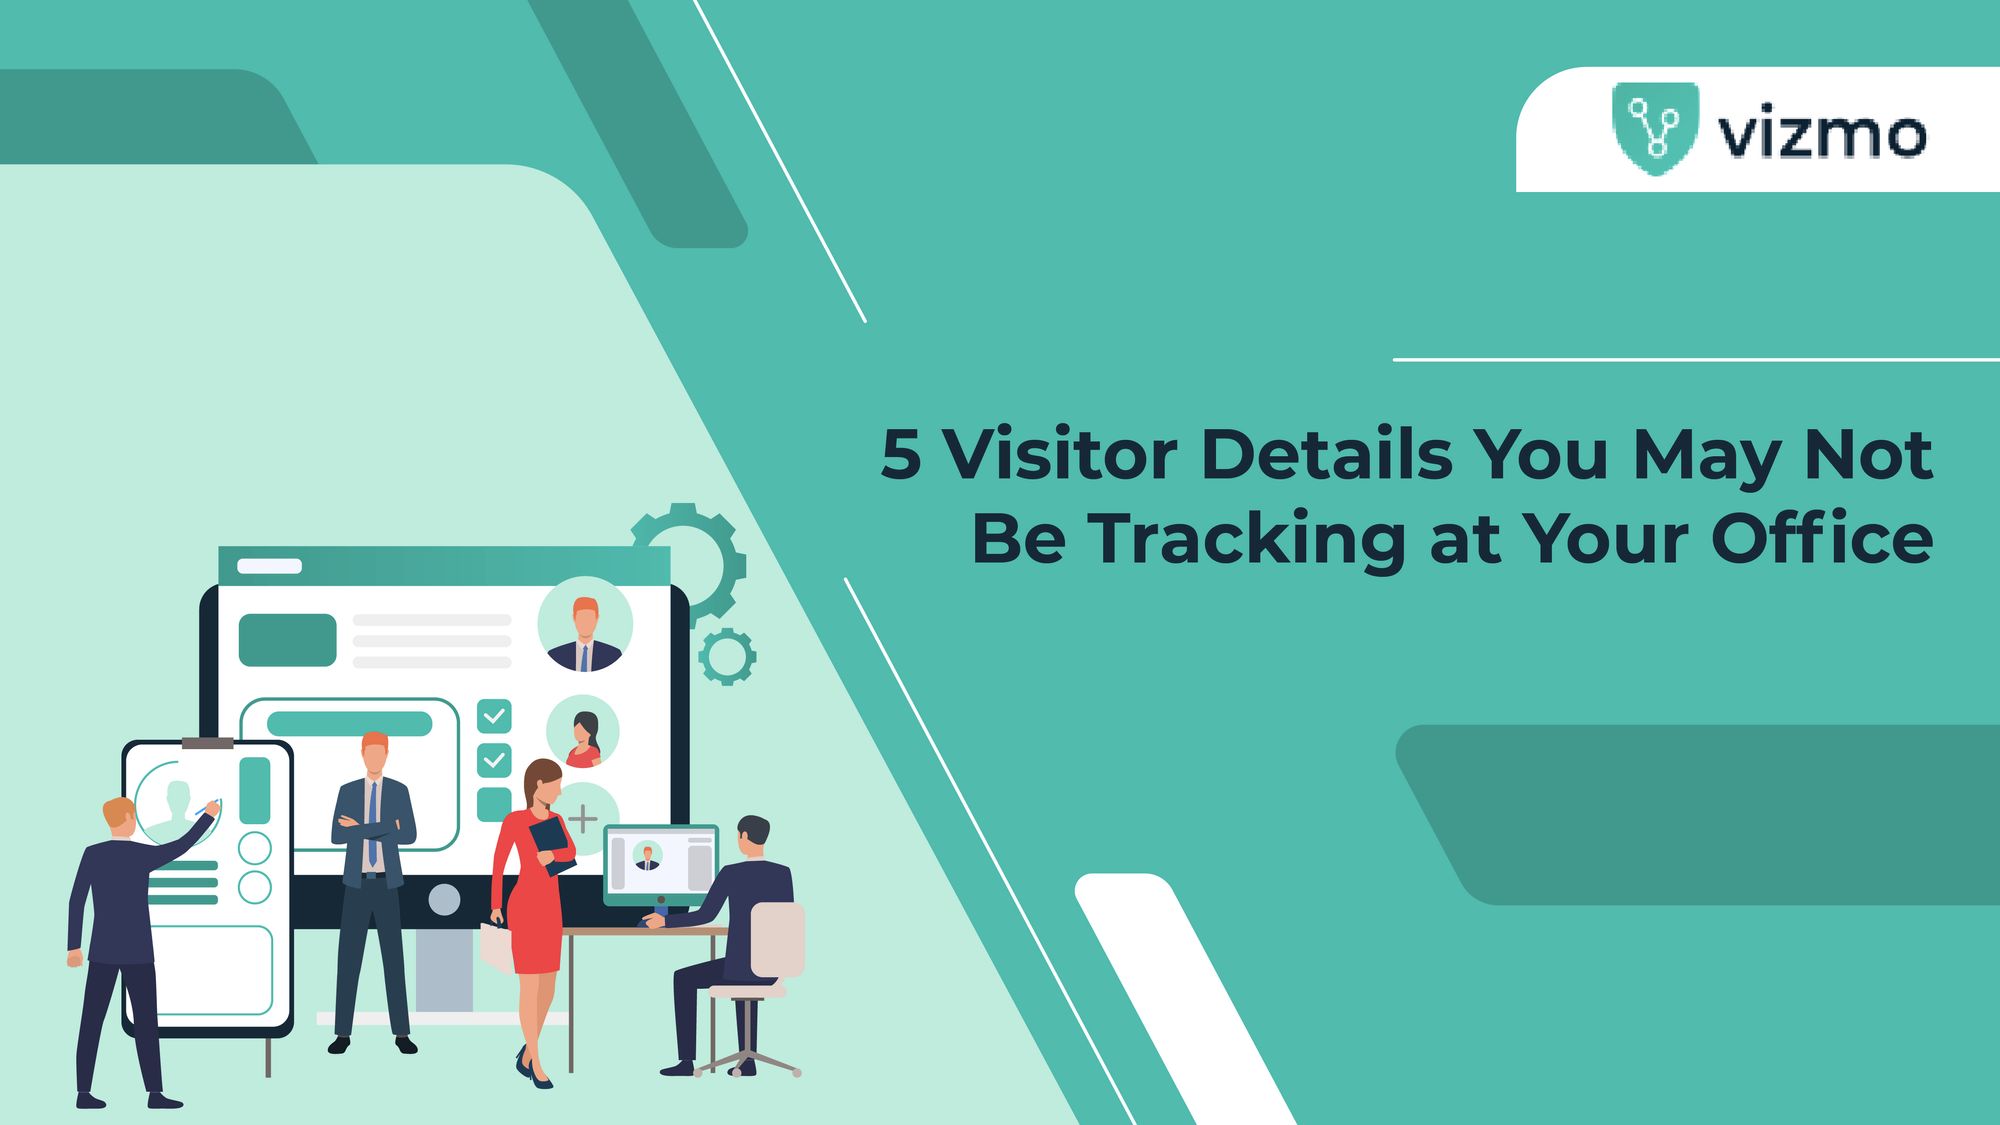 5 Visitor Details You May Not Be Tracking at Your Office